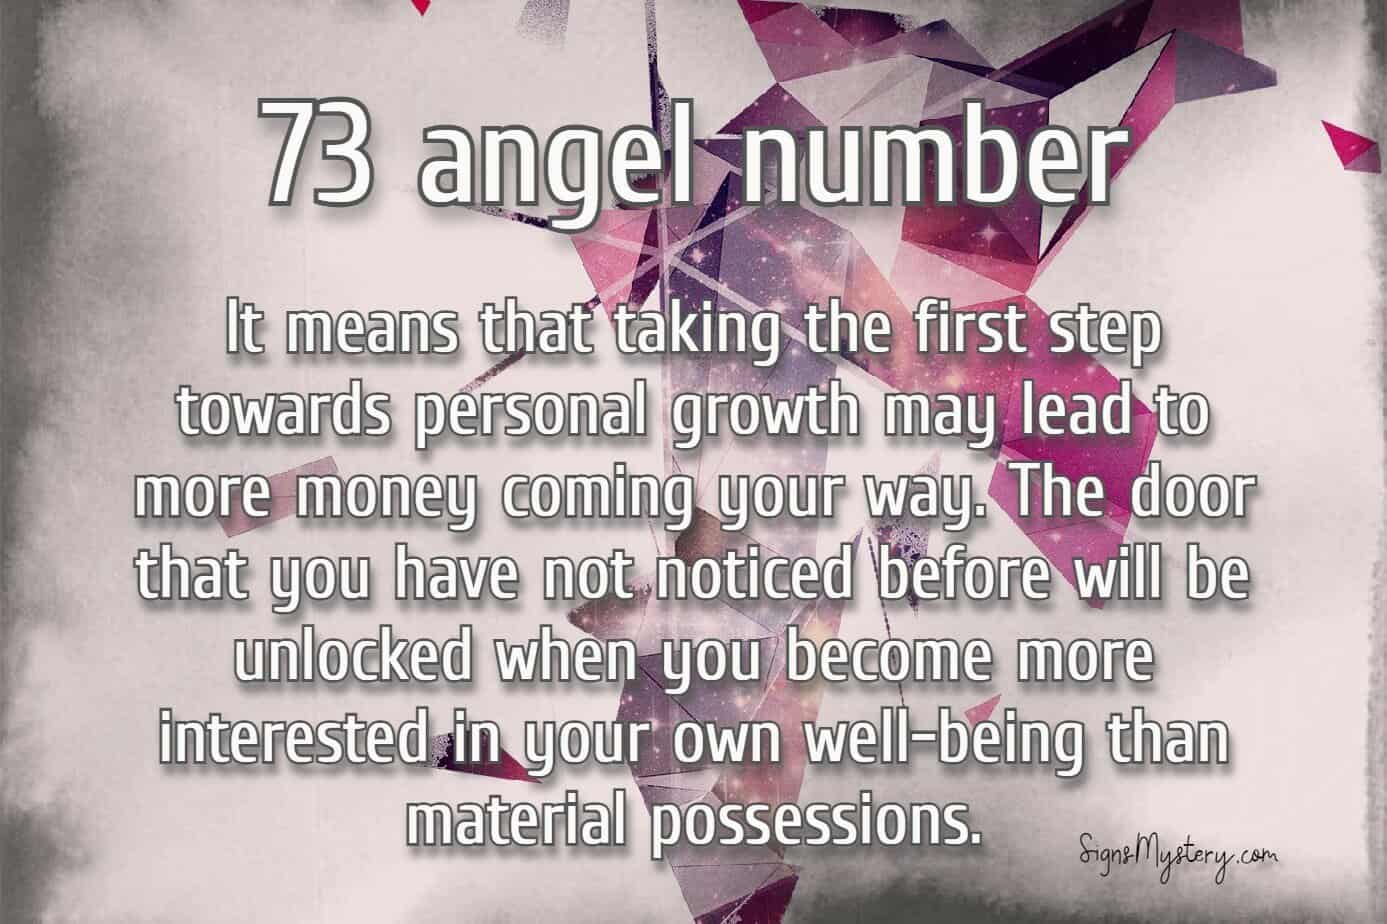 73 angel number meaning